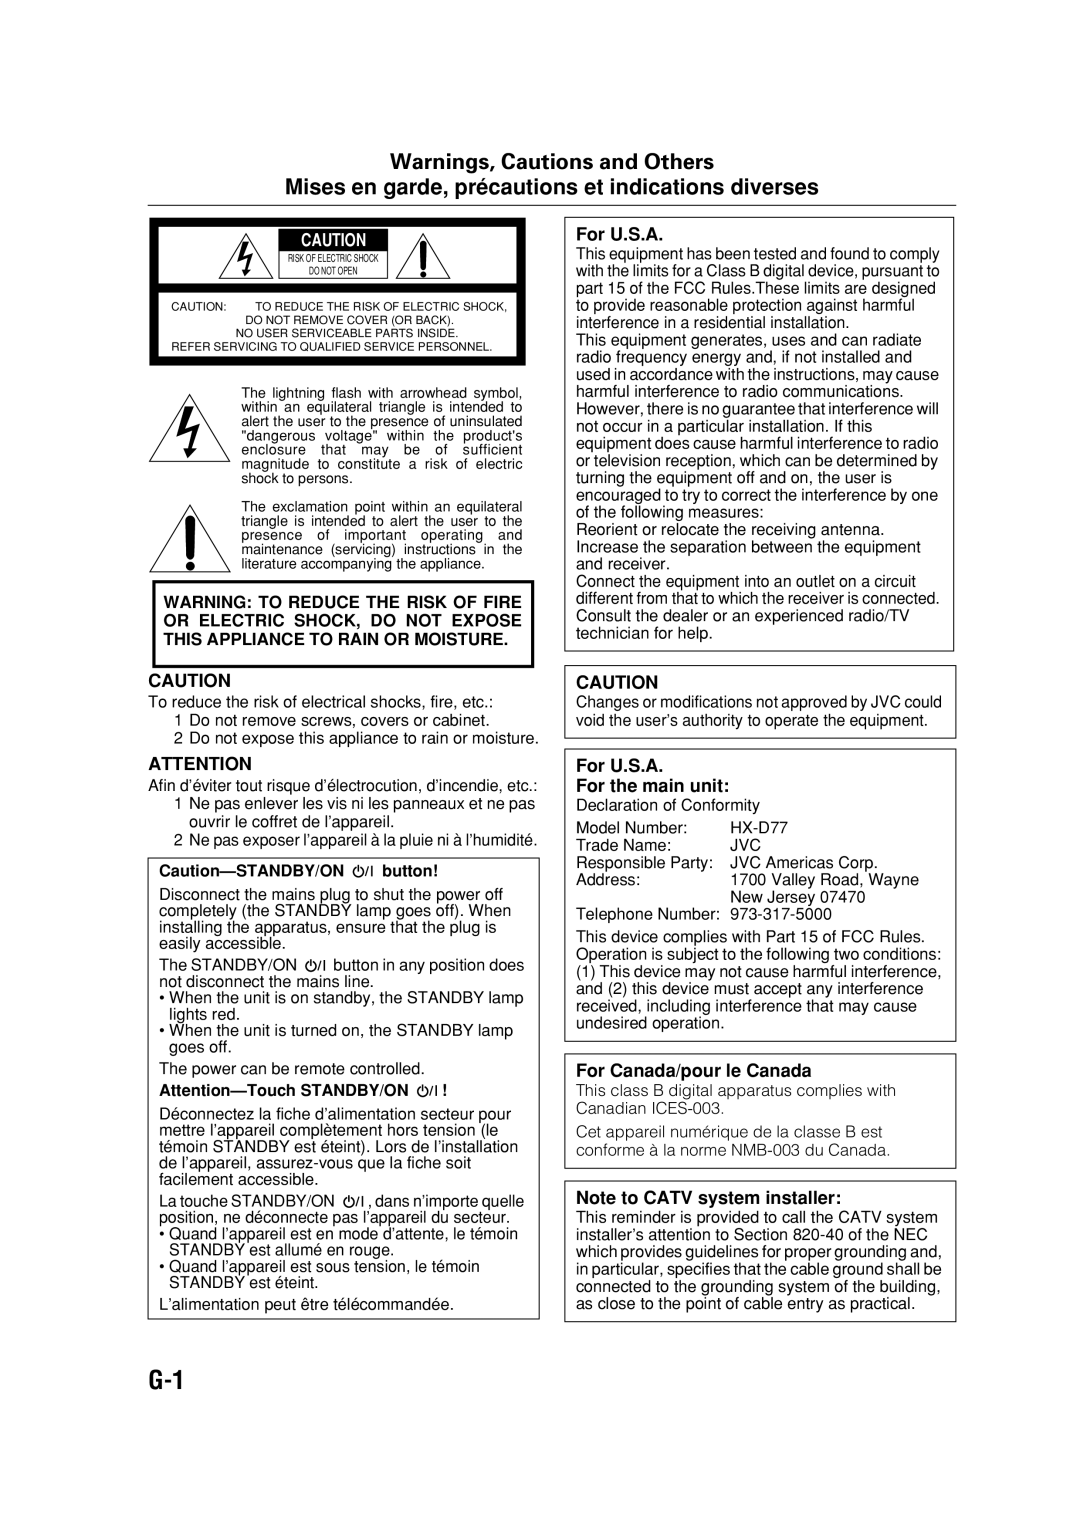 JVC SP-HXD77, CA-HXD77 manual For U.S.A For the main unit, For Canada/pour le Canada, Note to CATV system installer 